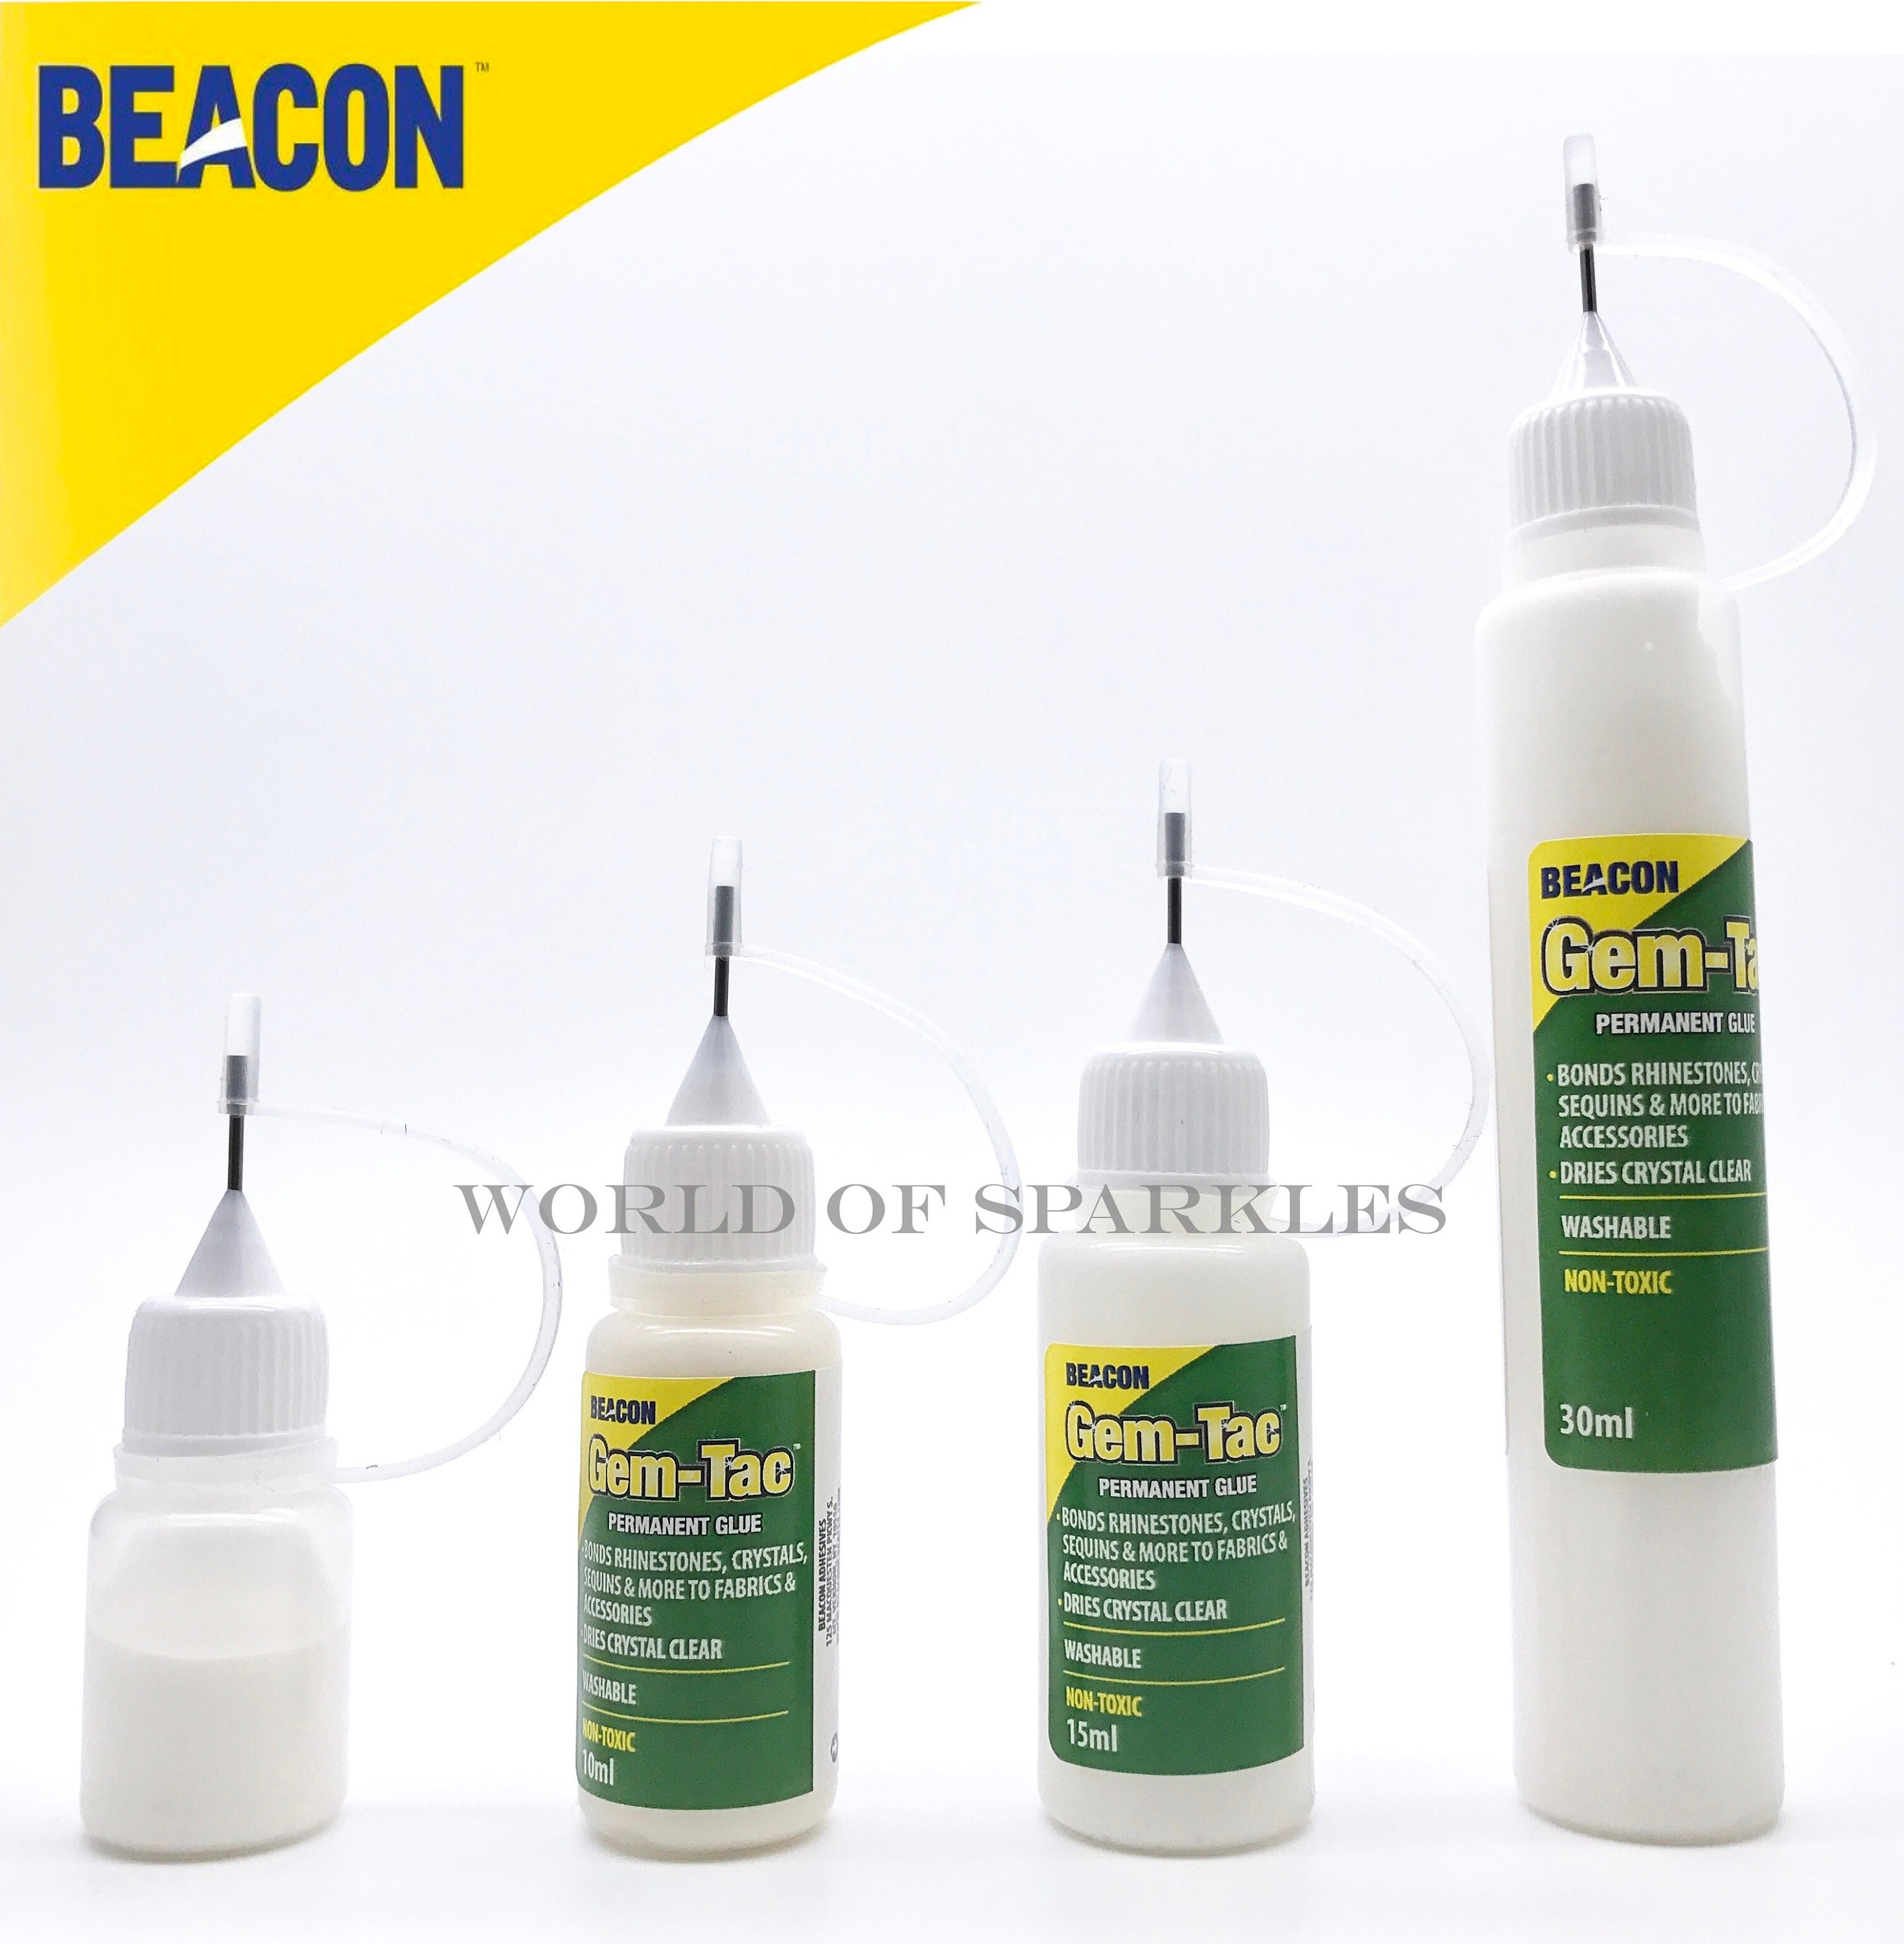 Beacon's Gem-tac Glue for Crafts Projects Art Work Jewelry Making